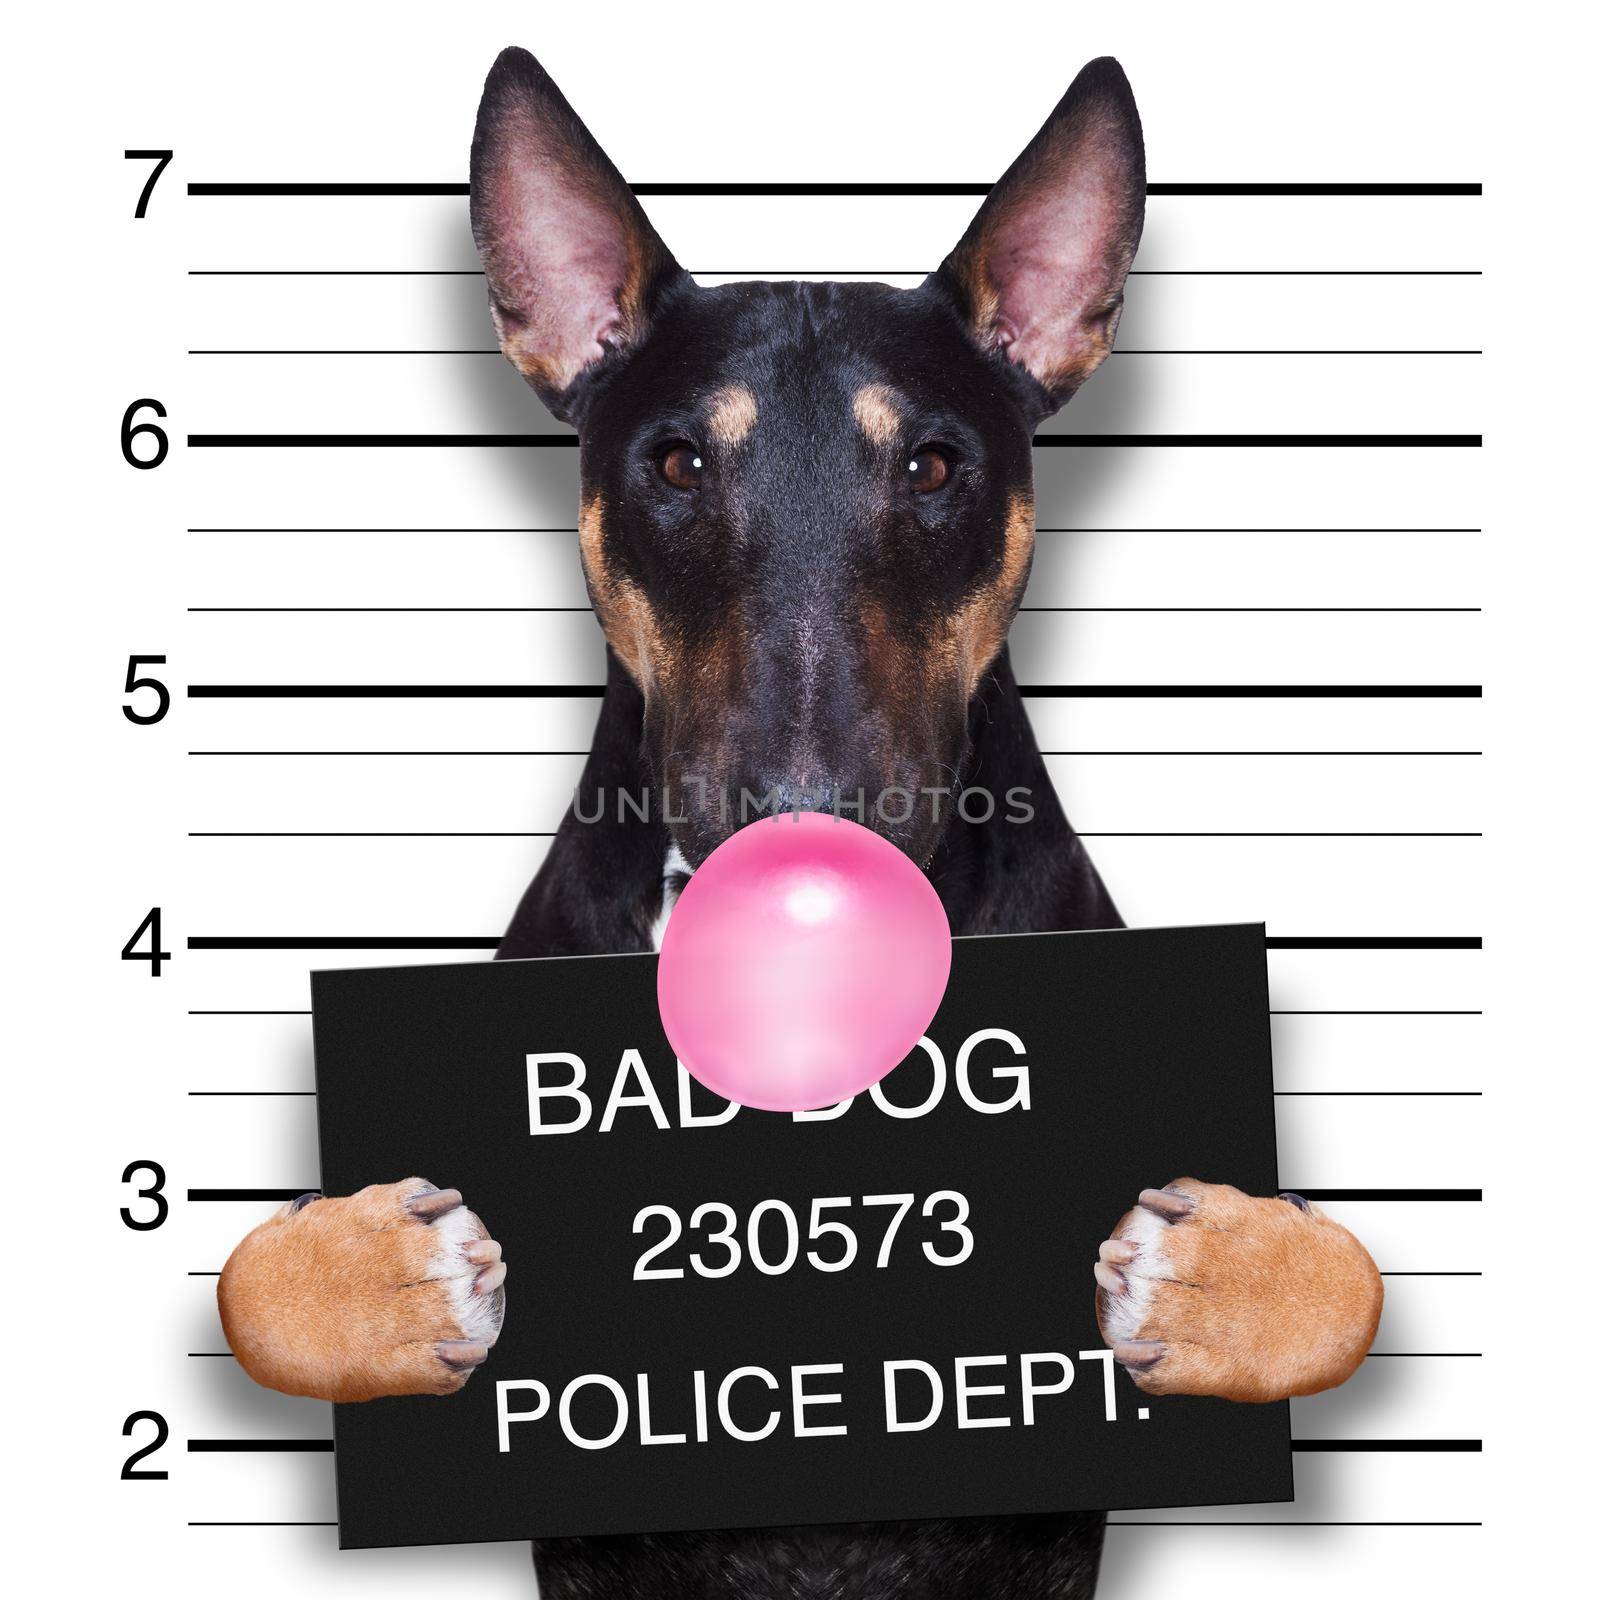 criminal mugshot  of pitbull terrier  dog at police station holding placard with bubble chewing gum , isolated on background